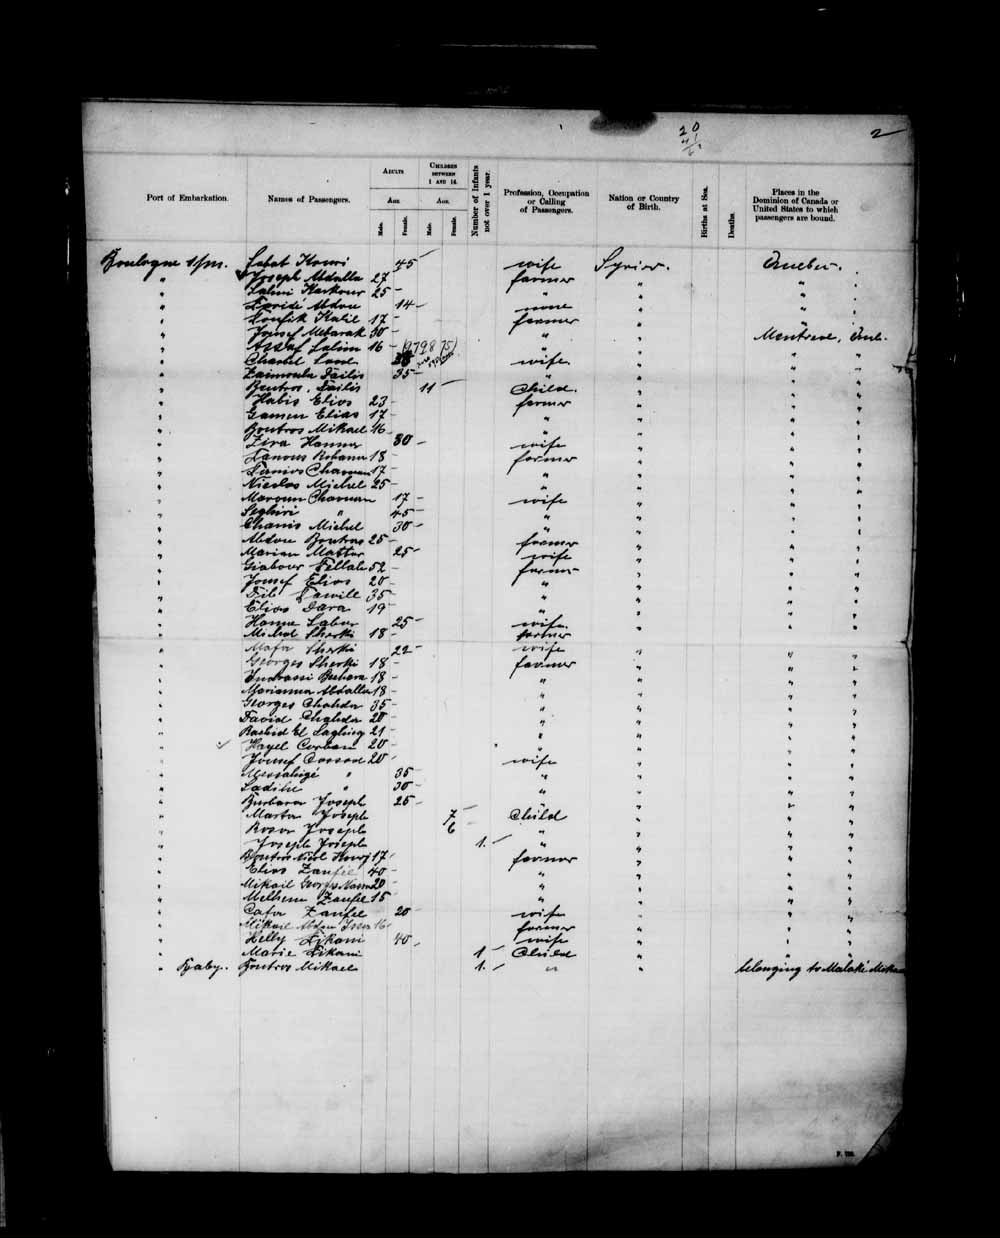 Digitized page of Passenger Lists for Image No.: e003691366